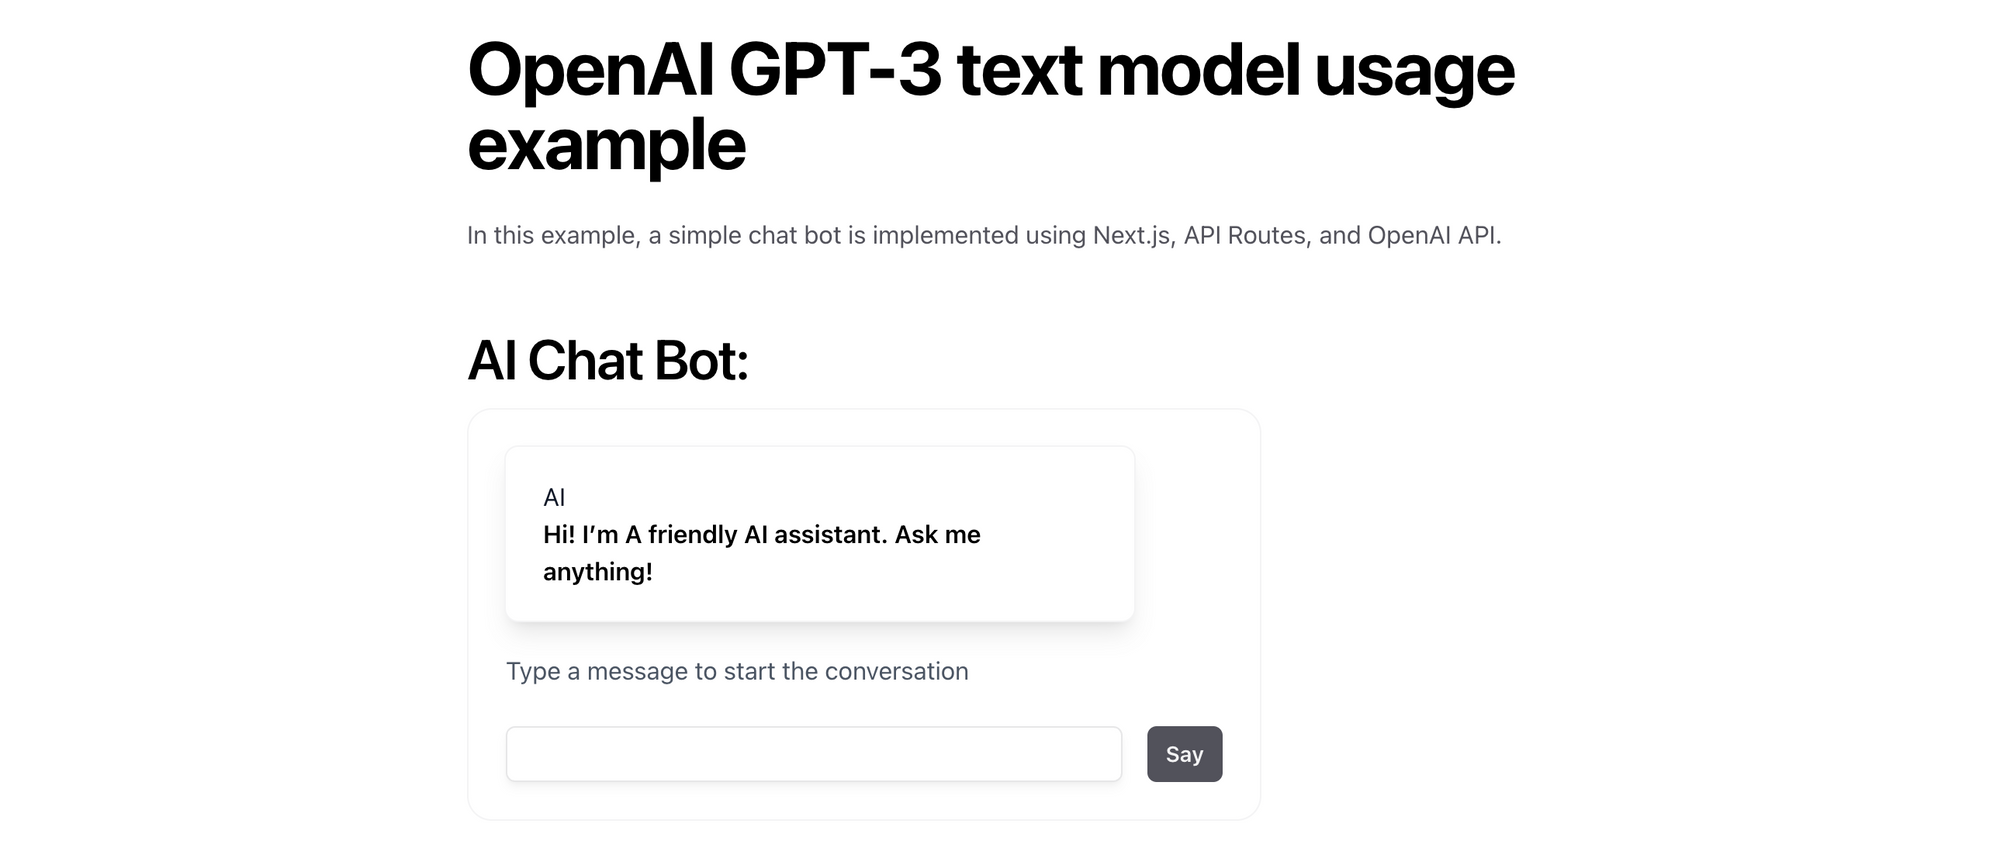 Your own OpenAI GPT-3 chatbot